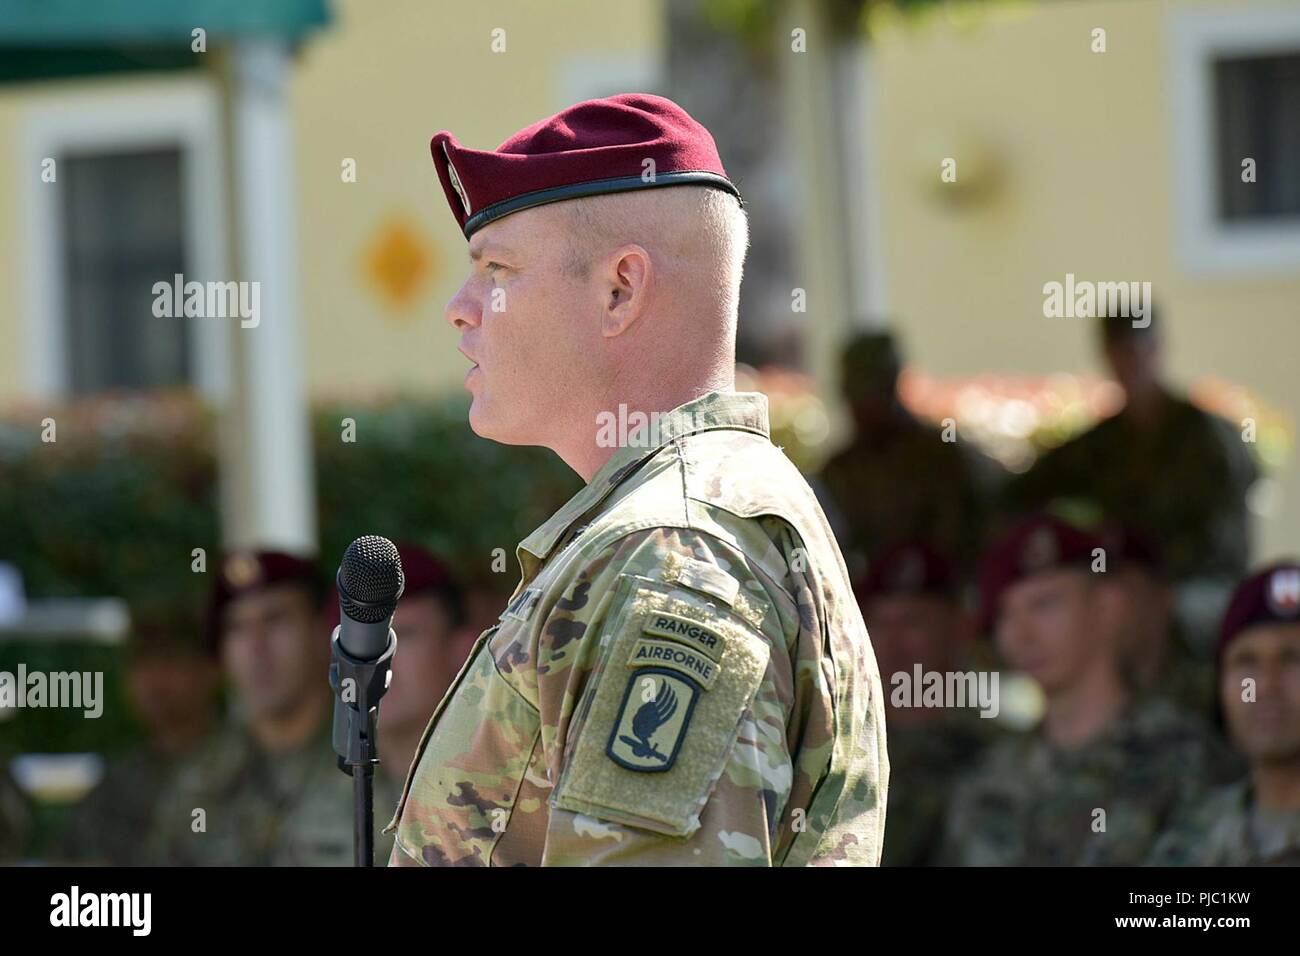 U.S. Army Lt. Col. Robert M. Shaw, commander of 1st Battalion, 503rd Infantry Regiment, 173rd Airborne Brigade, provides remarks during the change of responsibility ceremony at Caserma Ederle in Vicenza, Italy, July 19, 2018. The 173rd Airborne Brigade is the U.S. Army Contingency Response Force in Europe, capable of projecting ready forces anywhere in the U.S. European, Africa or Central Commands' areas of responsibility. Stock Photo